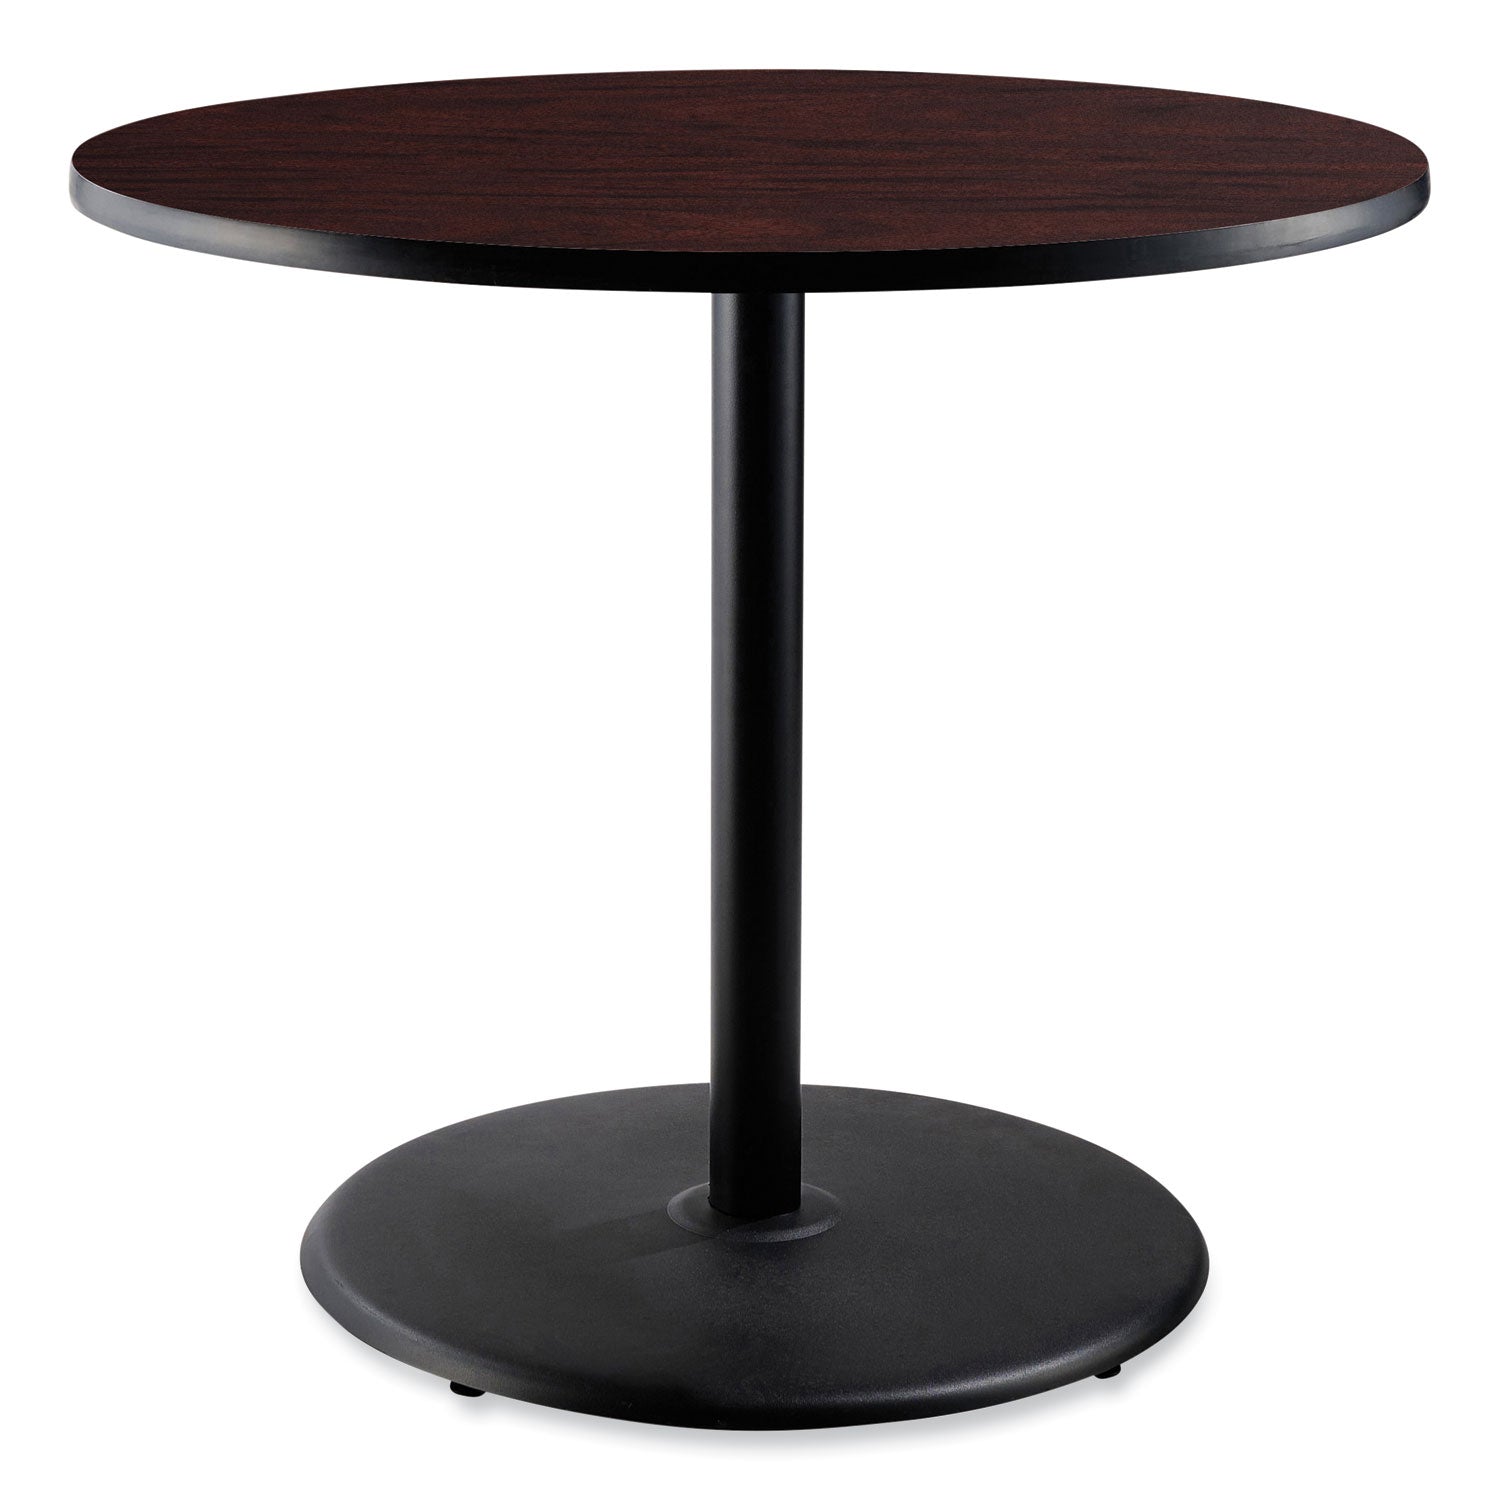 cafe-table-36-diameter-x-36h-round-top-base-mahogany-top-black-base-ships-in-7-10-business-days_npsct13636rc1my - 1